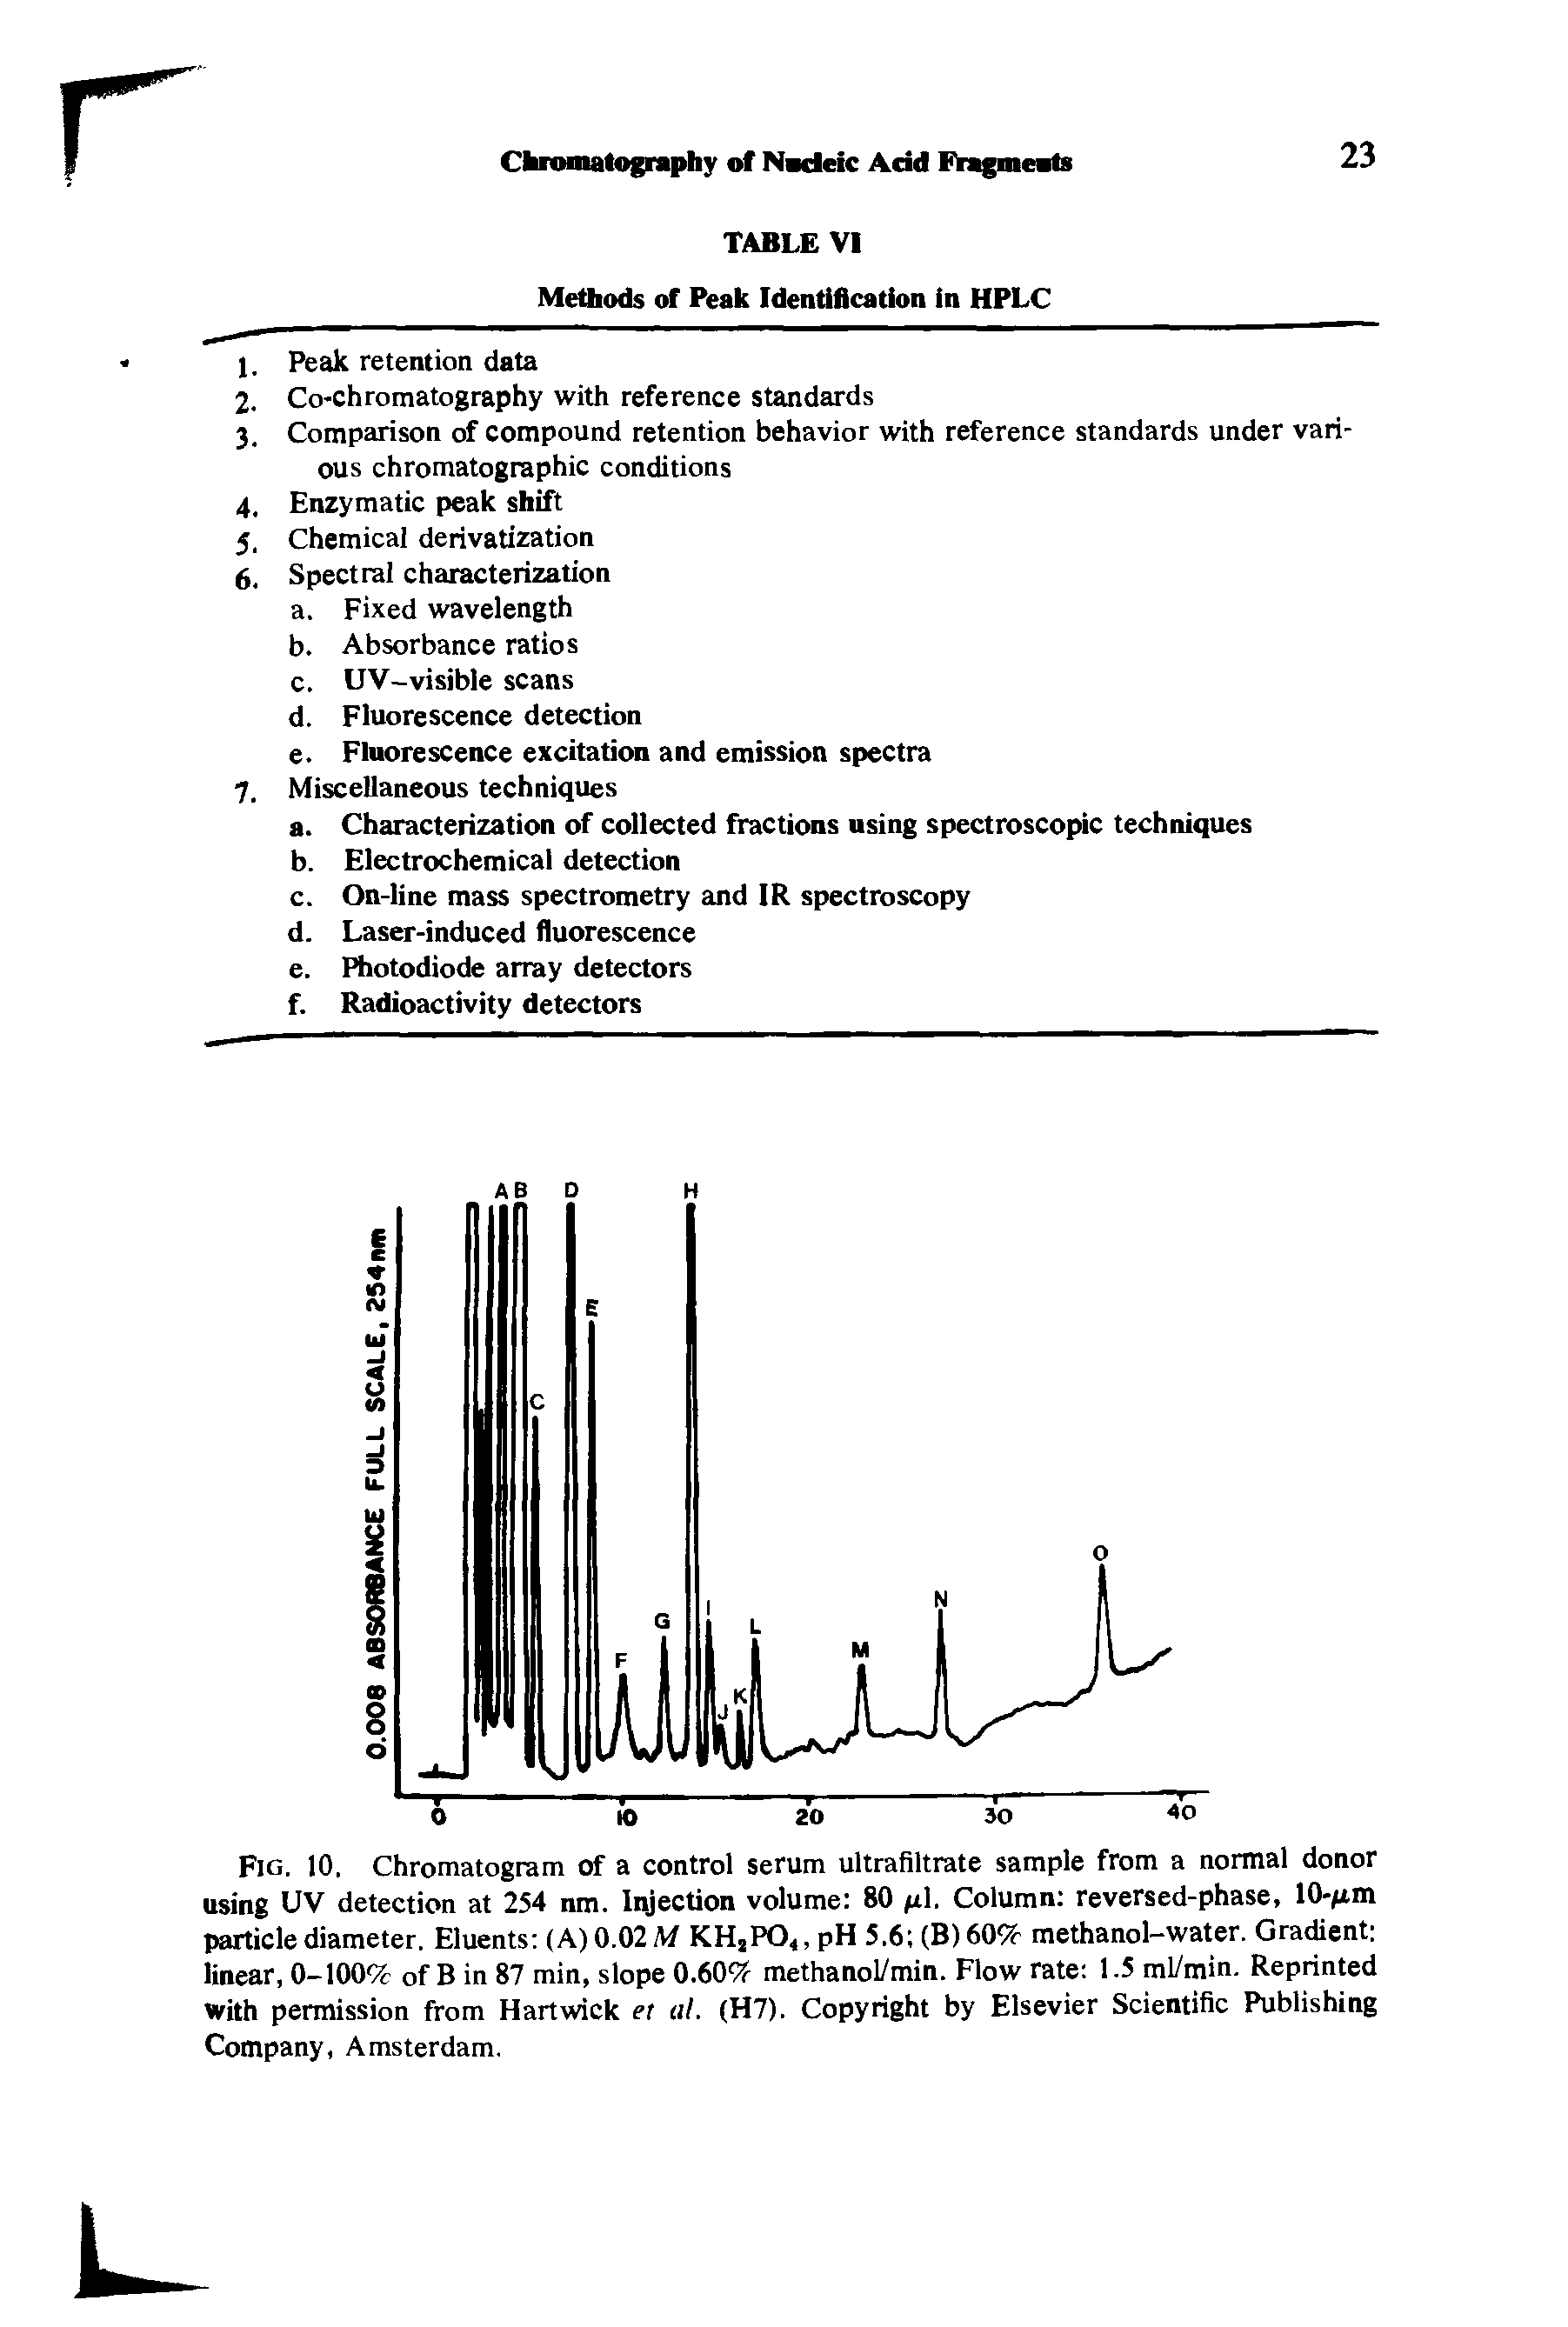 Fig. 10. Chromatogram of a control serum ultrafiltrate sample from a normal donor using UV detection at 254 nm. Injection volume 80 1. Column reversed-phase, lO- rm particle diameter. Eluents (A) 0.02 M KHjPO<, pH 5.6 (B) 60% methanol-water. Gradient linear, 0-100% of B in 87 min, slope 0.60% methanol/min. Flow rate 1.5 ml/min. Reprinted with permission from Hartwick et at. (H7). Copyright by Elsevier Scientific Publishing Company, Amsterdam,...